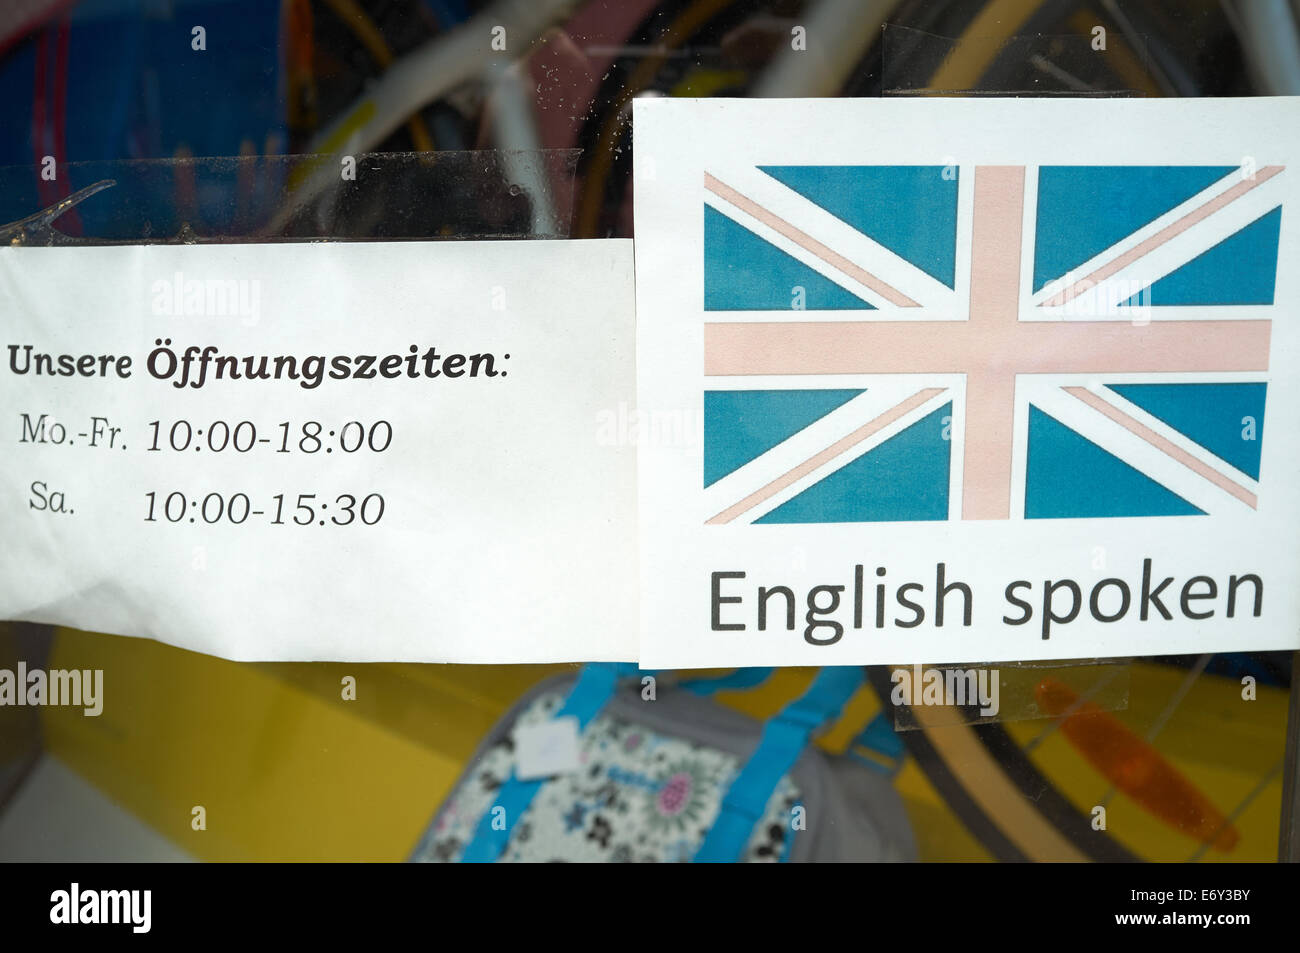 English spoken sign in the window of a German cycle shop Stock Photo